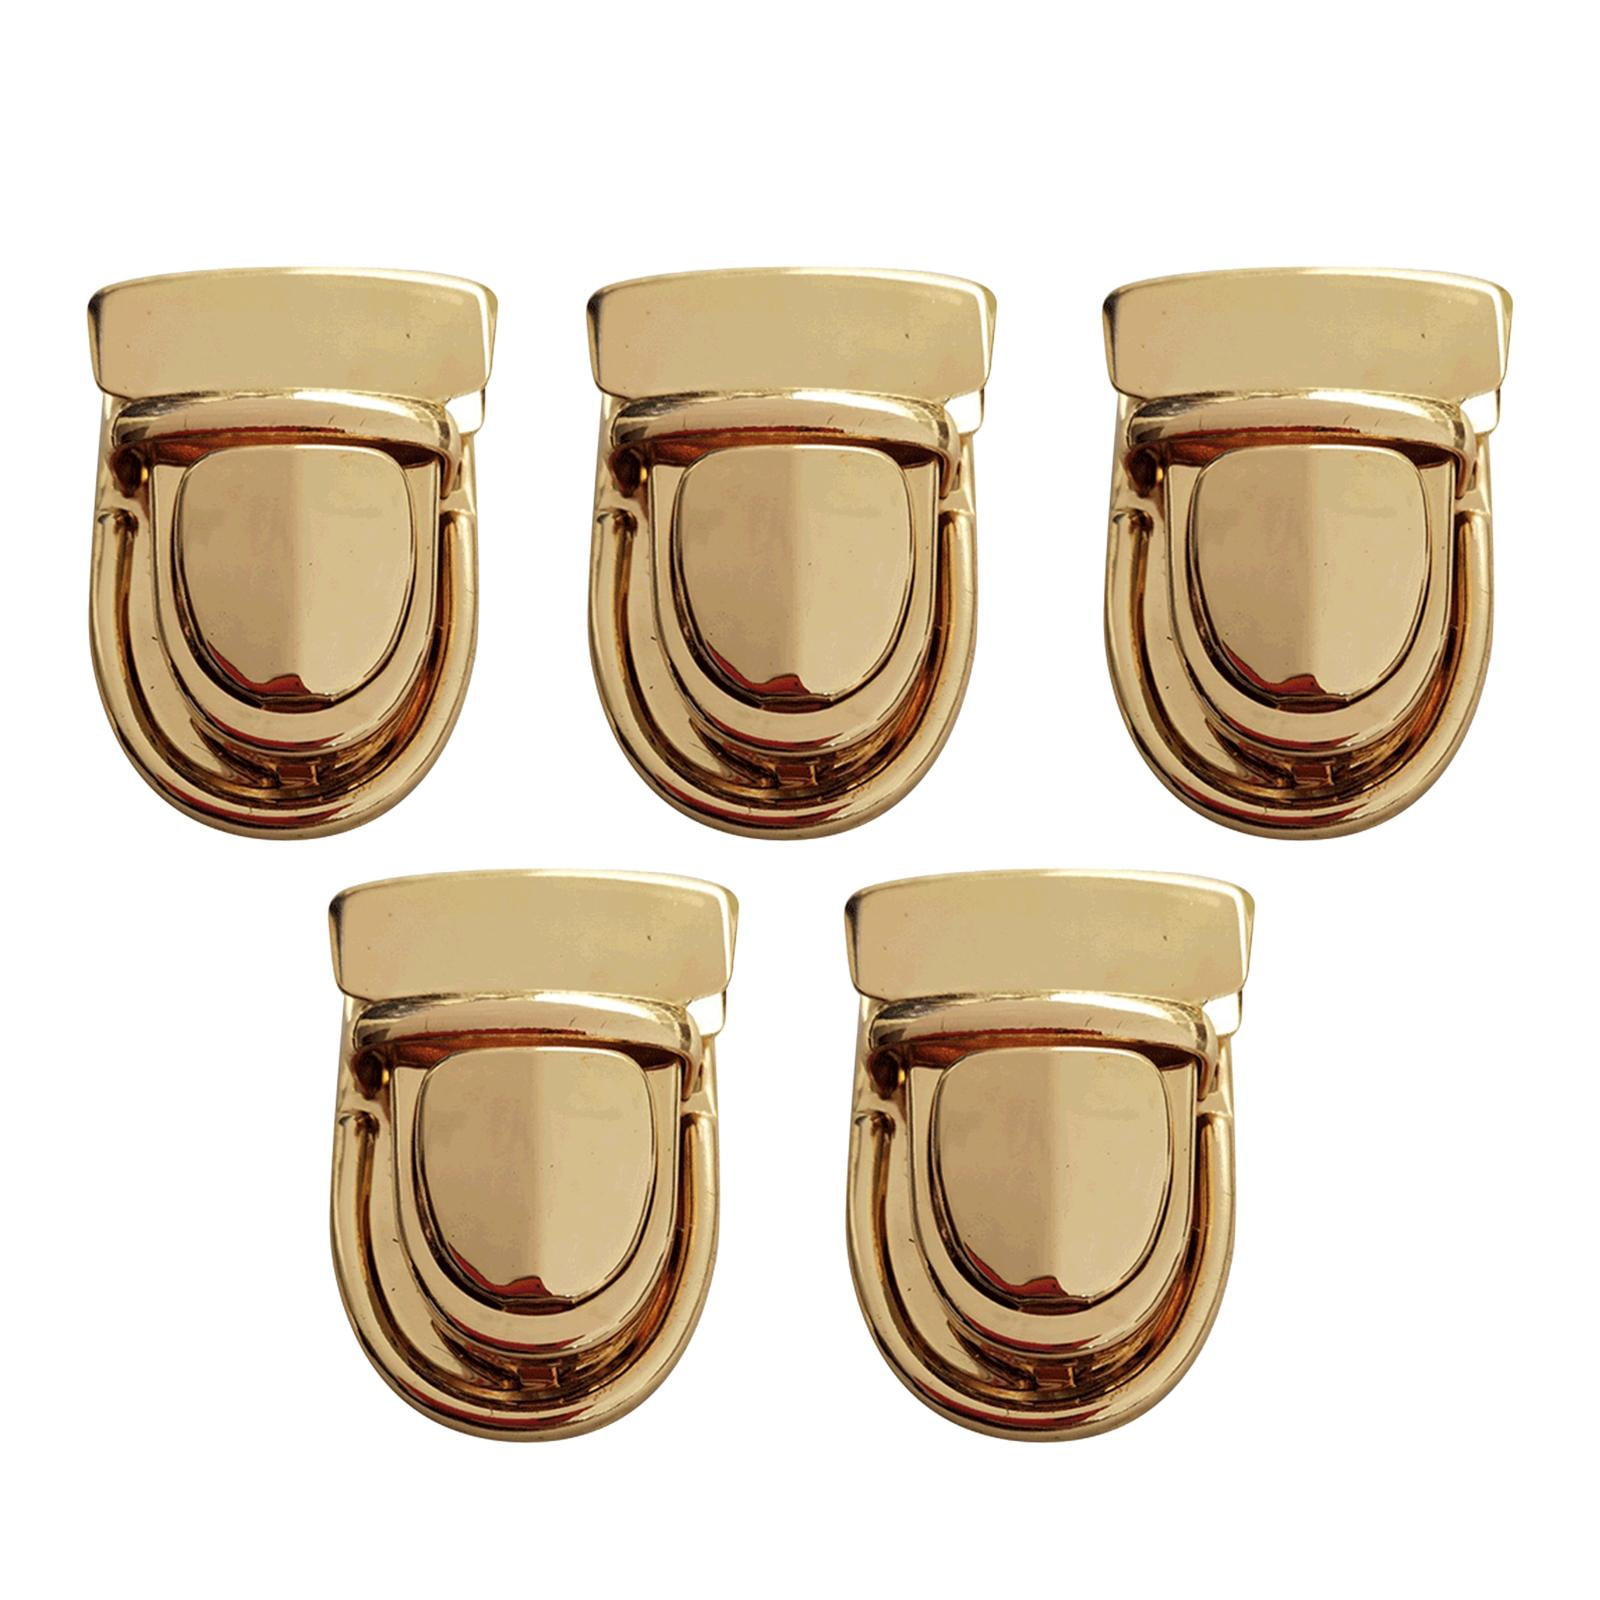 5pcs Tuck Lock Clasp Purse Purse Buckle Fasteners Wallet Buckle Purse Clasp Locks for DIY Craft Wallets Bag Leather Handbags Making A, Men's, Size